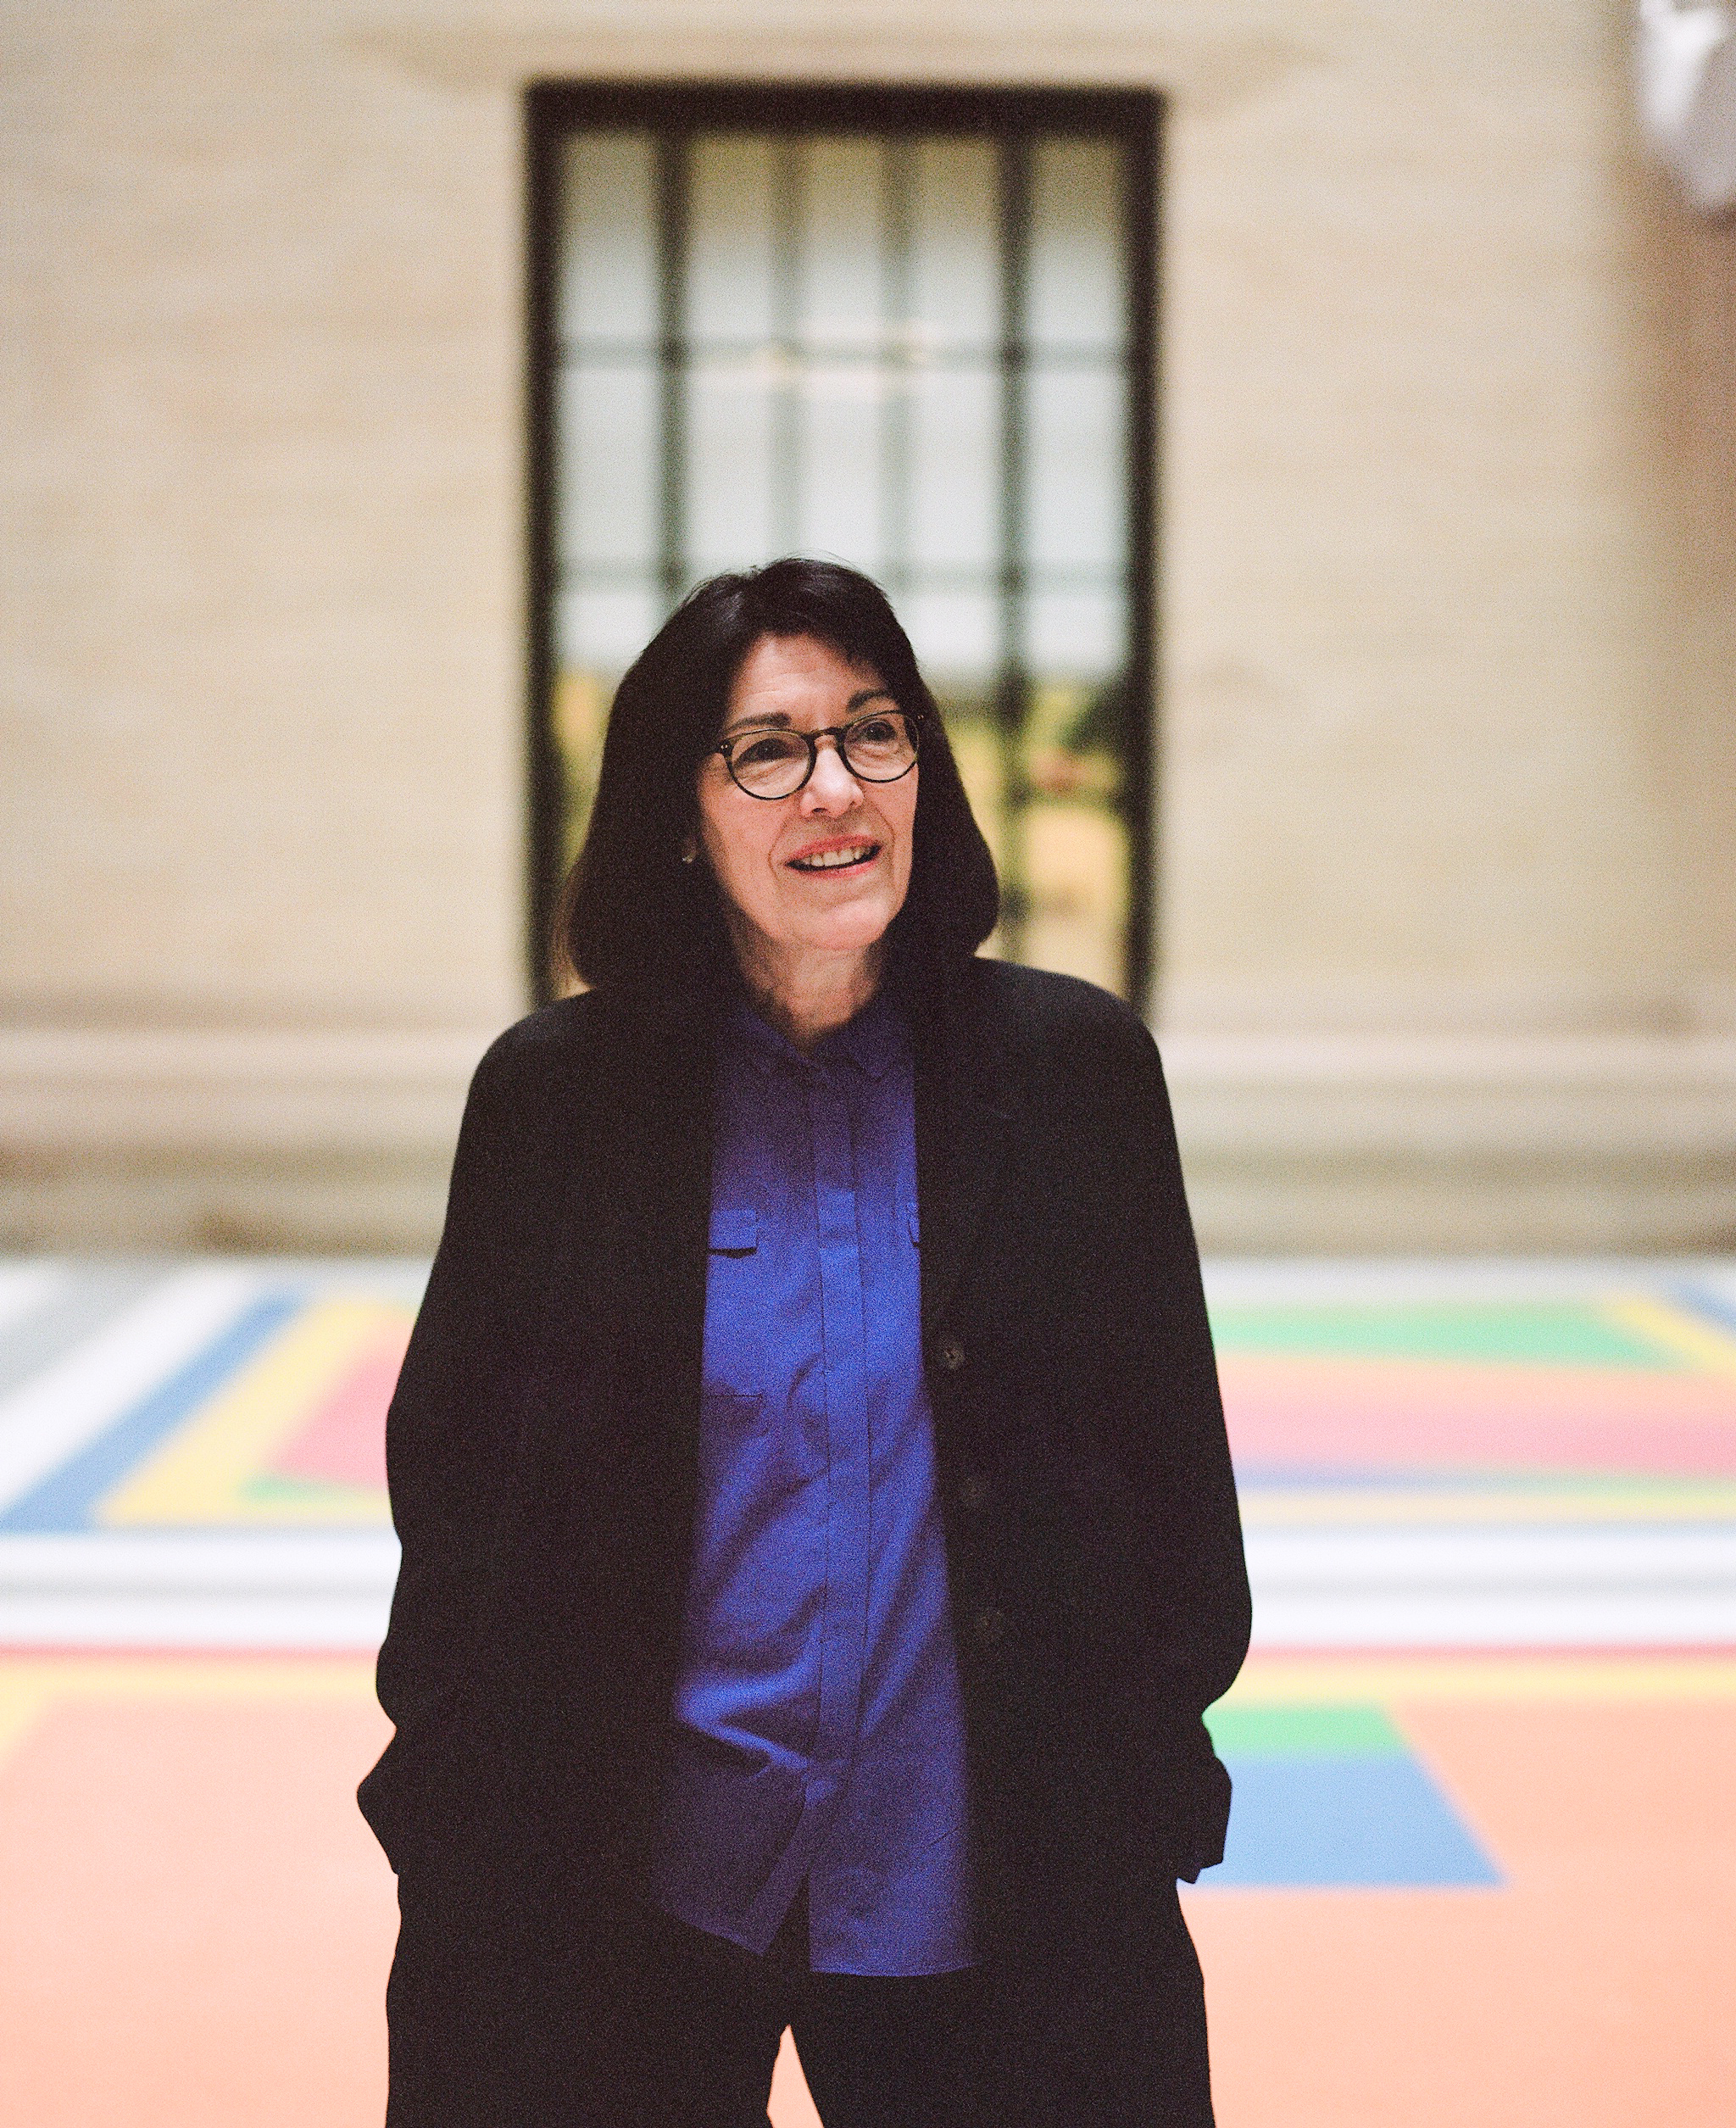 Leila Kinney, executive director of MIT’s Center for Art, Science and Technology (CAST), in front of Sol LeWitt’s Bars of Color within Squares (MIT), 2007, designed for the university’s physics department